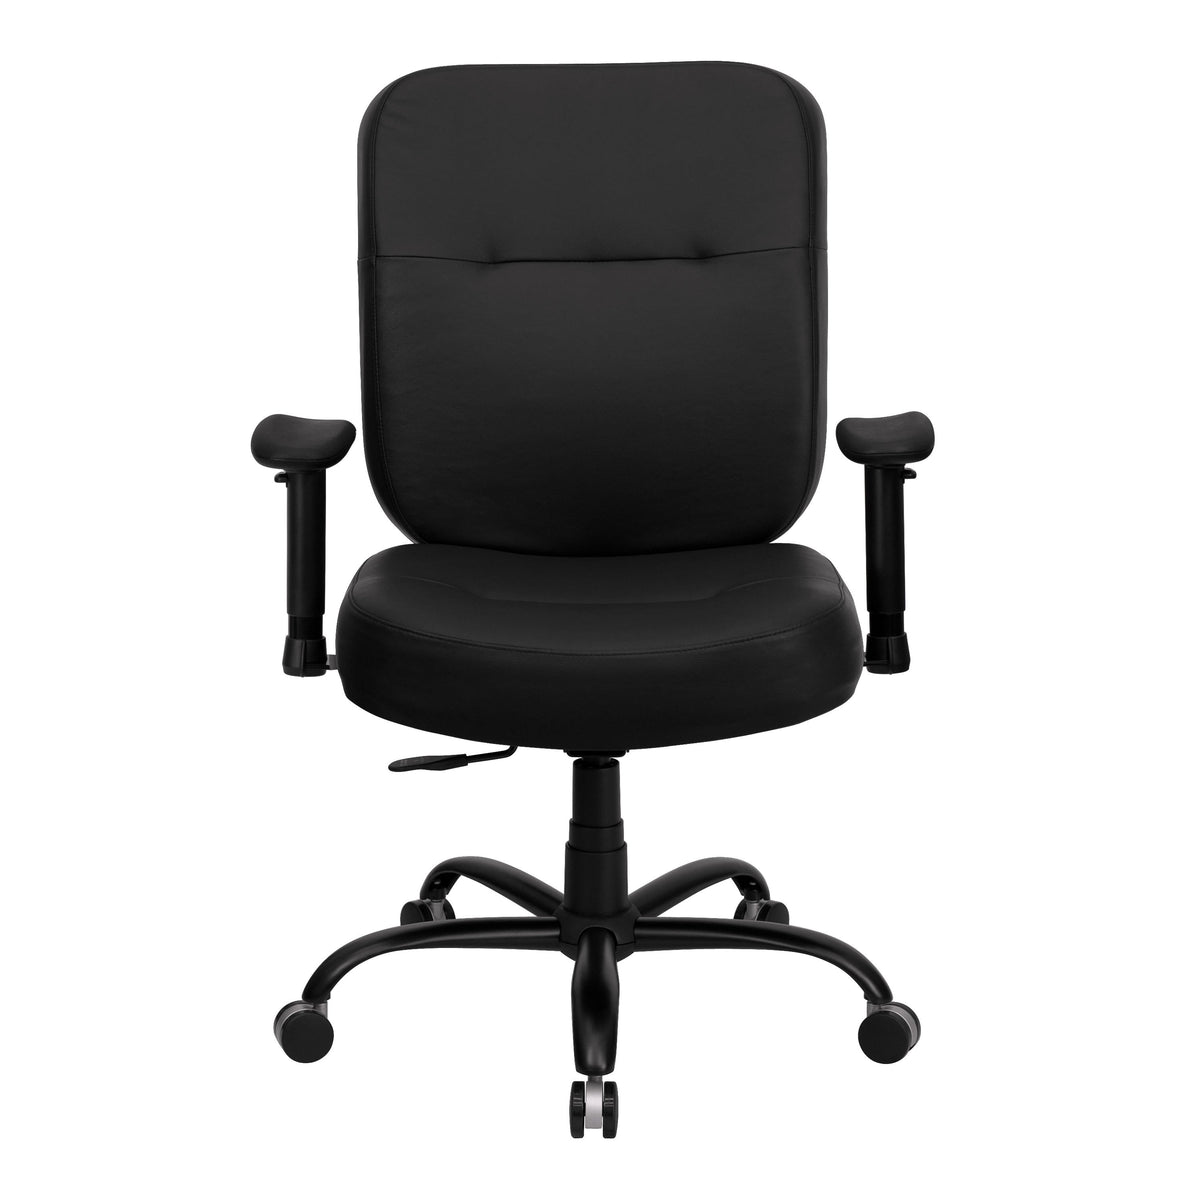 Black LeatherSoft |#| Big & Tall 400 lb. Rated High Back Black LeatherSoft Executive Ergonomic Chair